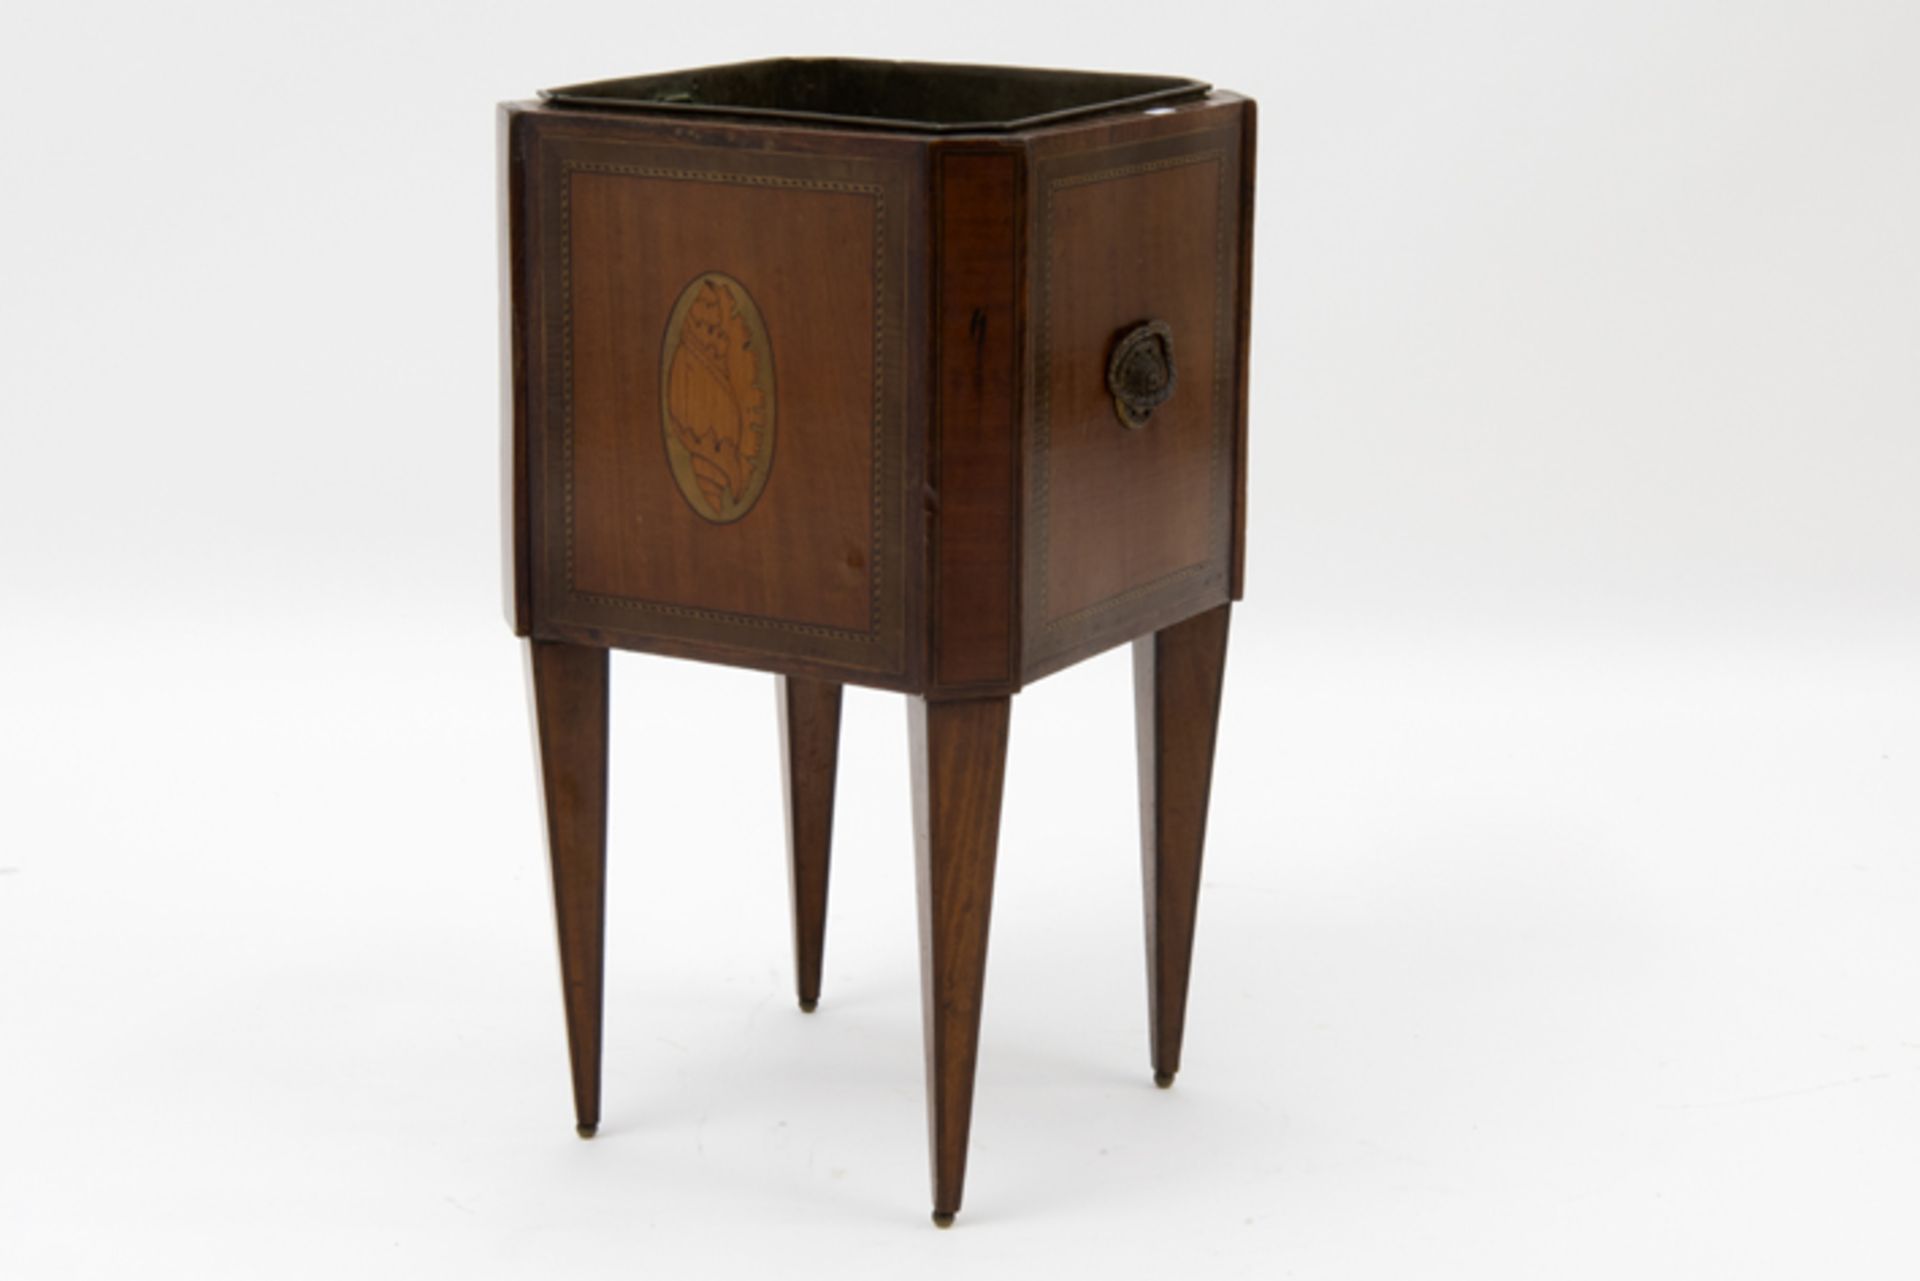 late 18th Cent. neoclassical teastove in marquetry Laat achttiende eeuwse neoclassicistische